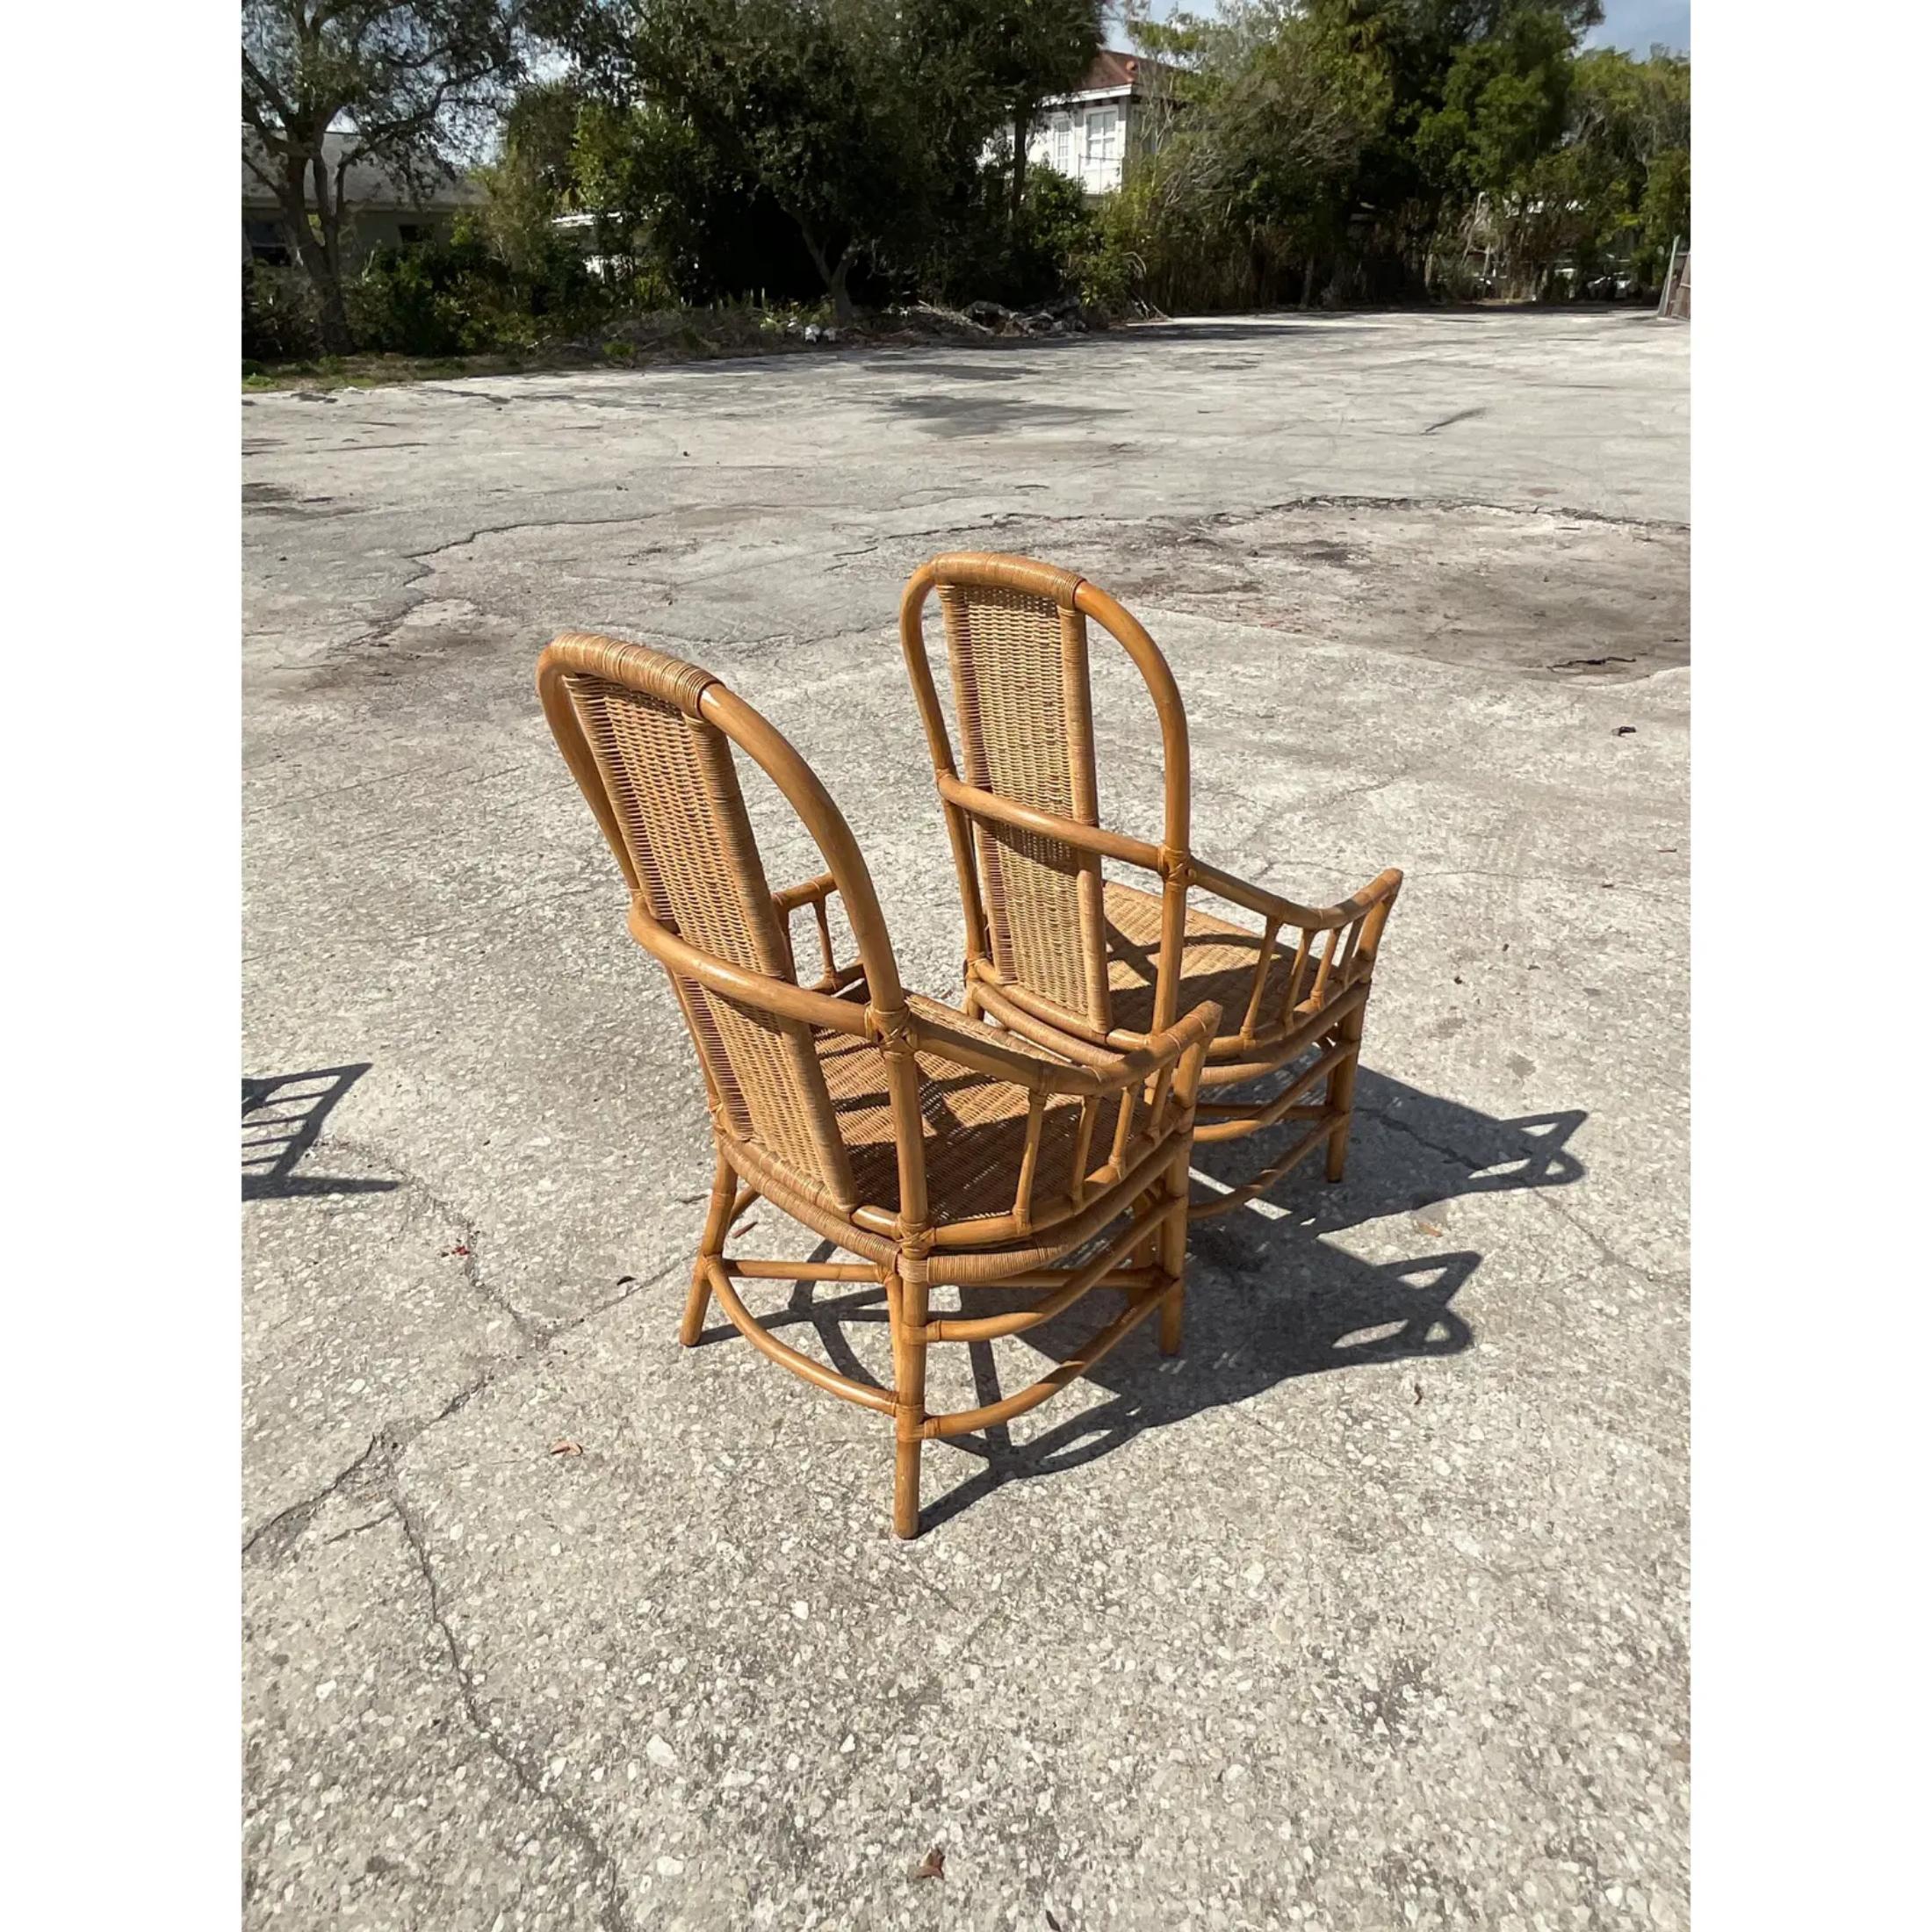 20th Century Vintage Coastal Mark David Woven Rattan Dining Chairs - Set of 4 For Sale